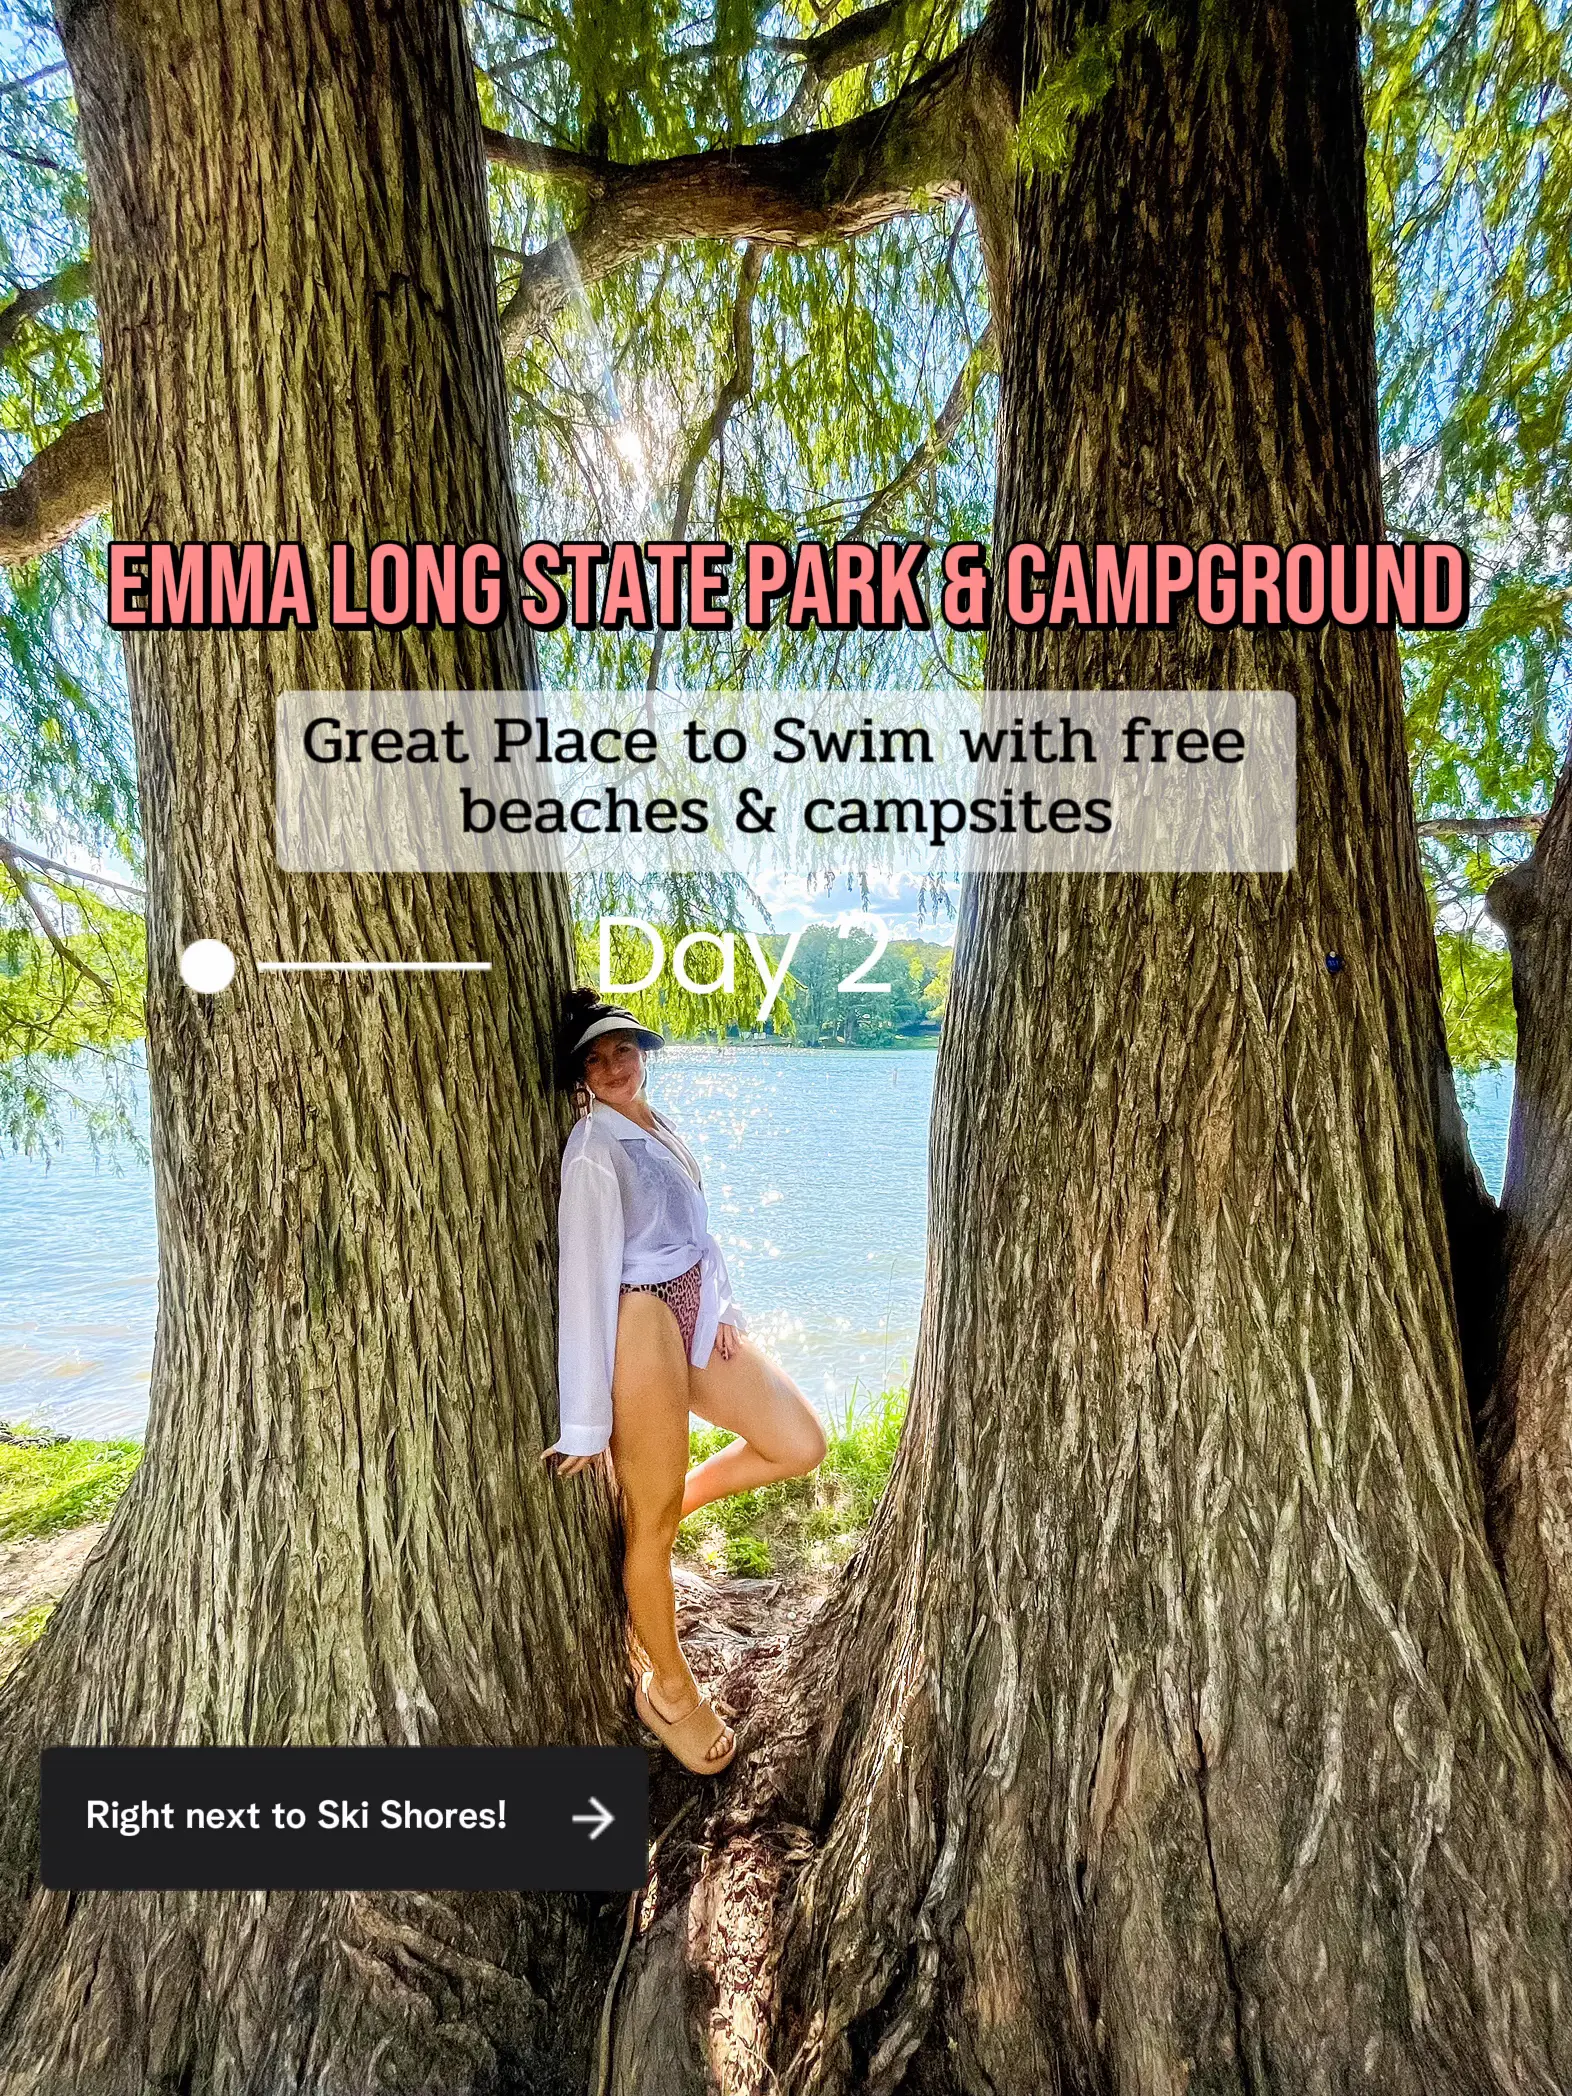  A woman is standing in front of a tree and a sign that says Emma Long State Park & Campground.